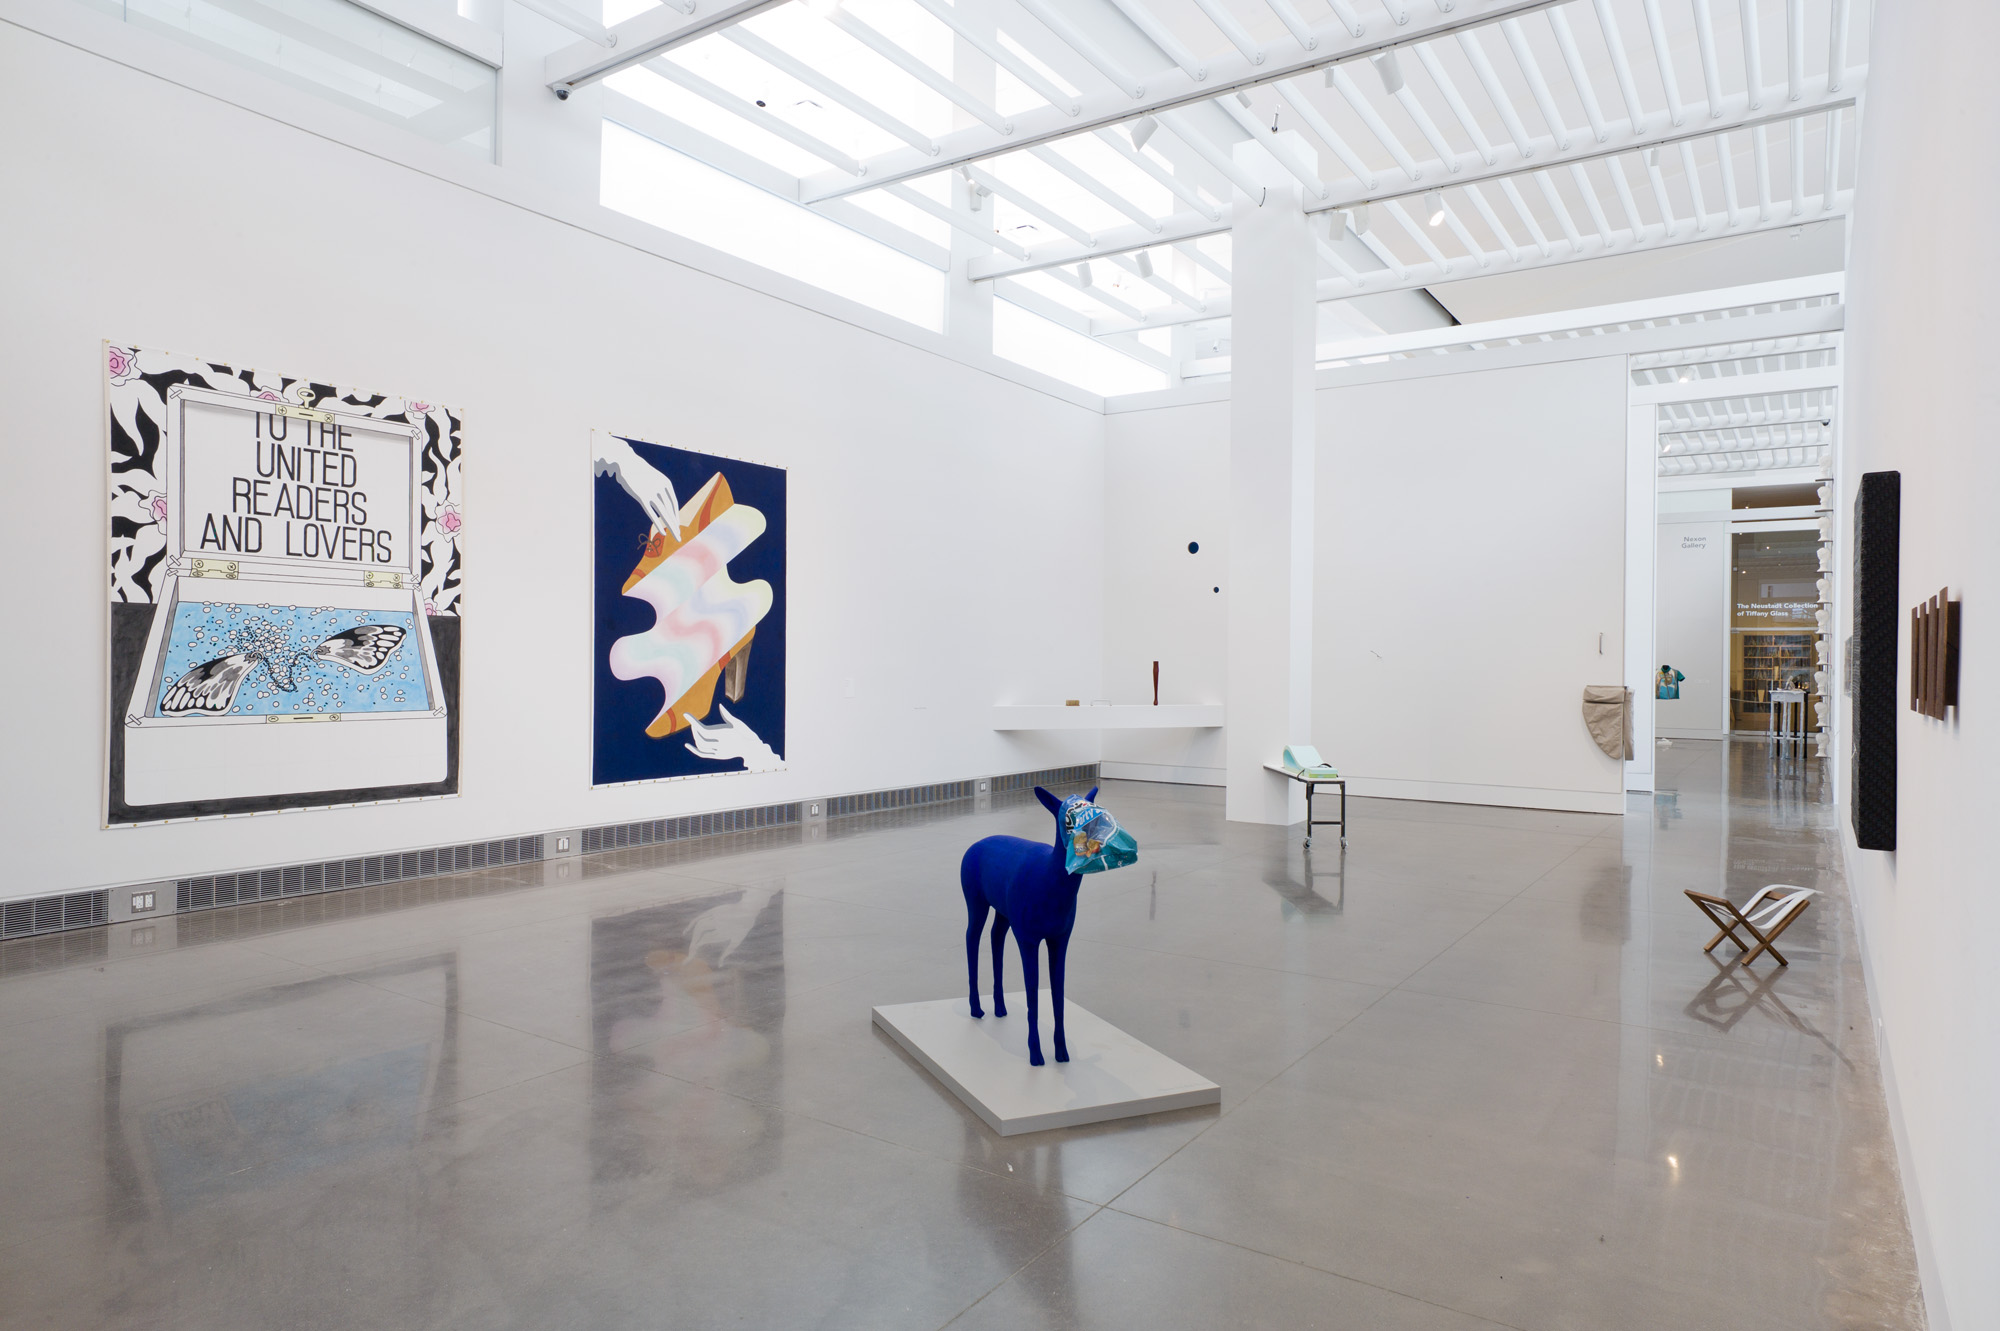 An exhibition room with large, two-dimensional artworks and sculptures hanging from the walls. On the exhibition floor is a sculpture of a dark blue, four-legged animal. The animal’s face is covered by a blue Tostitos chip bag.